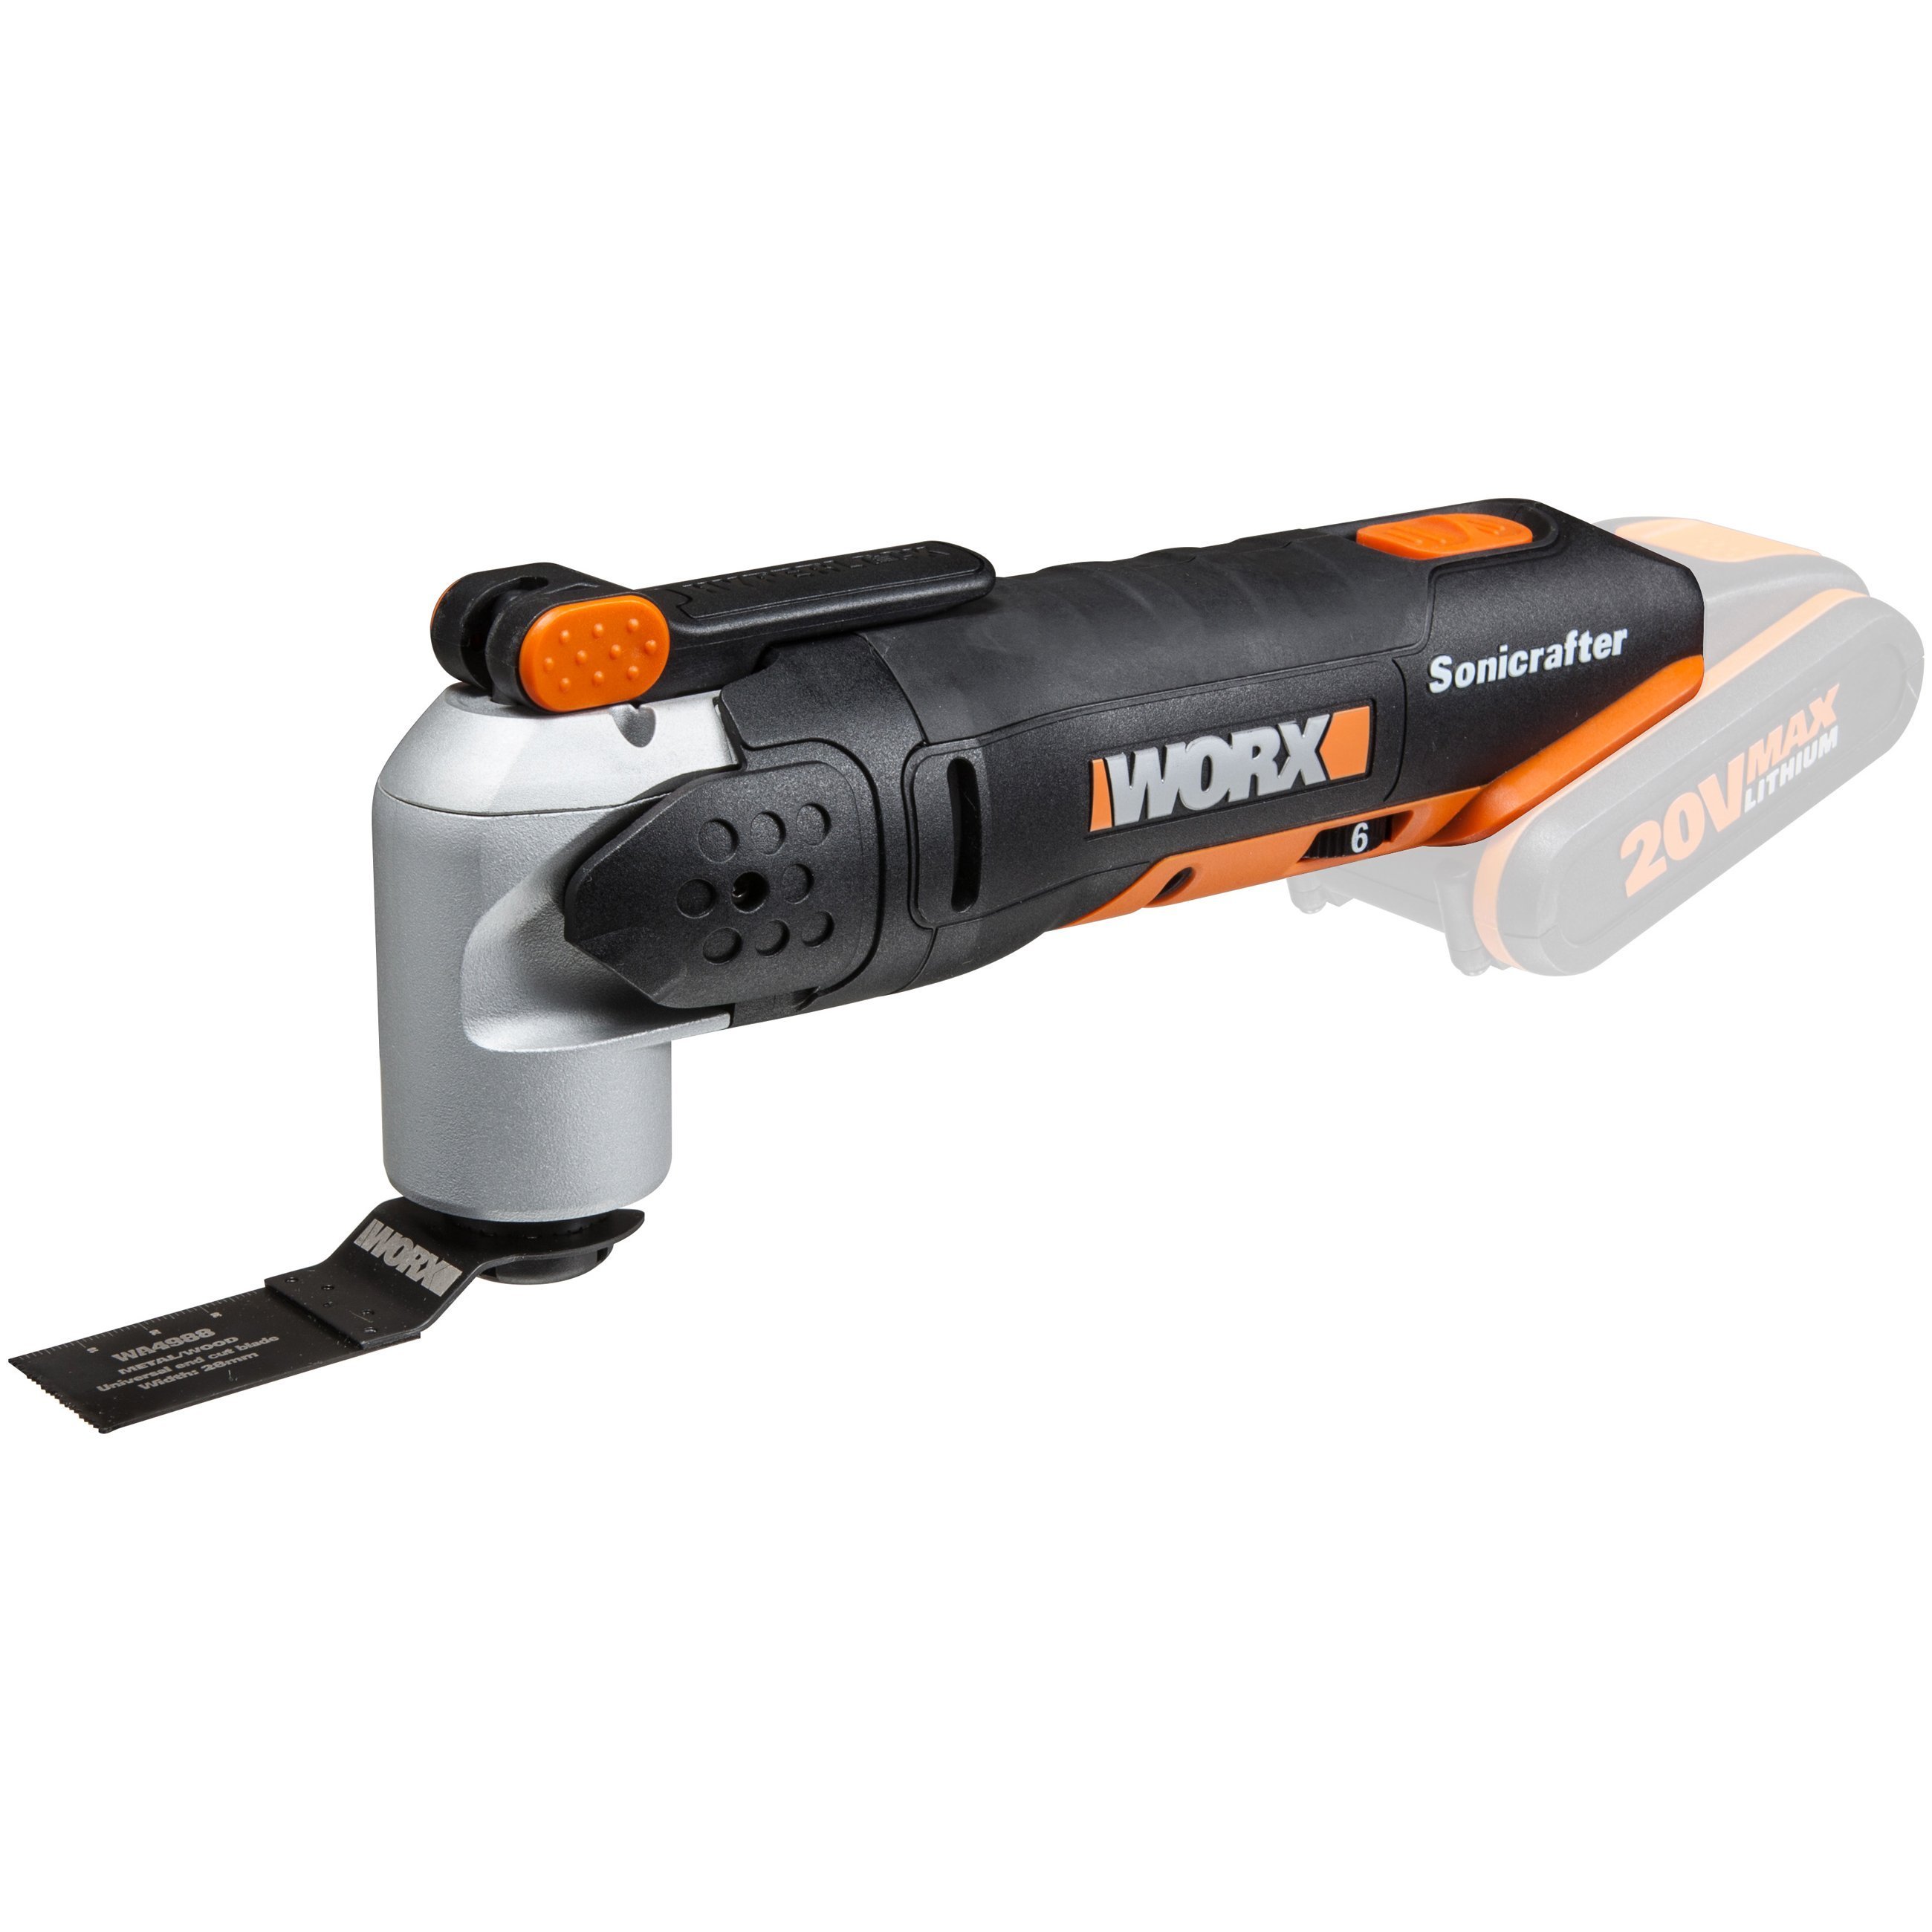 WORX WX372.2 20V Max Cordless Hammer Drill with Powershare Battery platform  220 volts 50 H